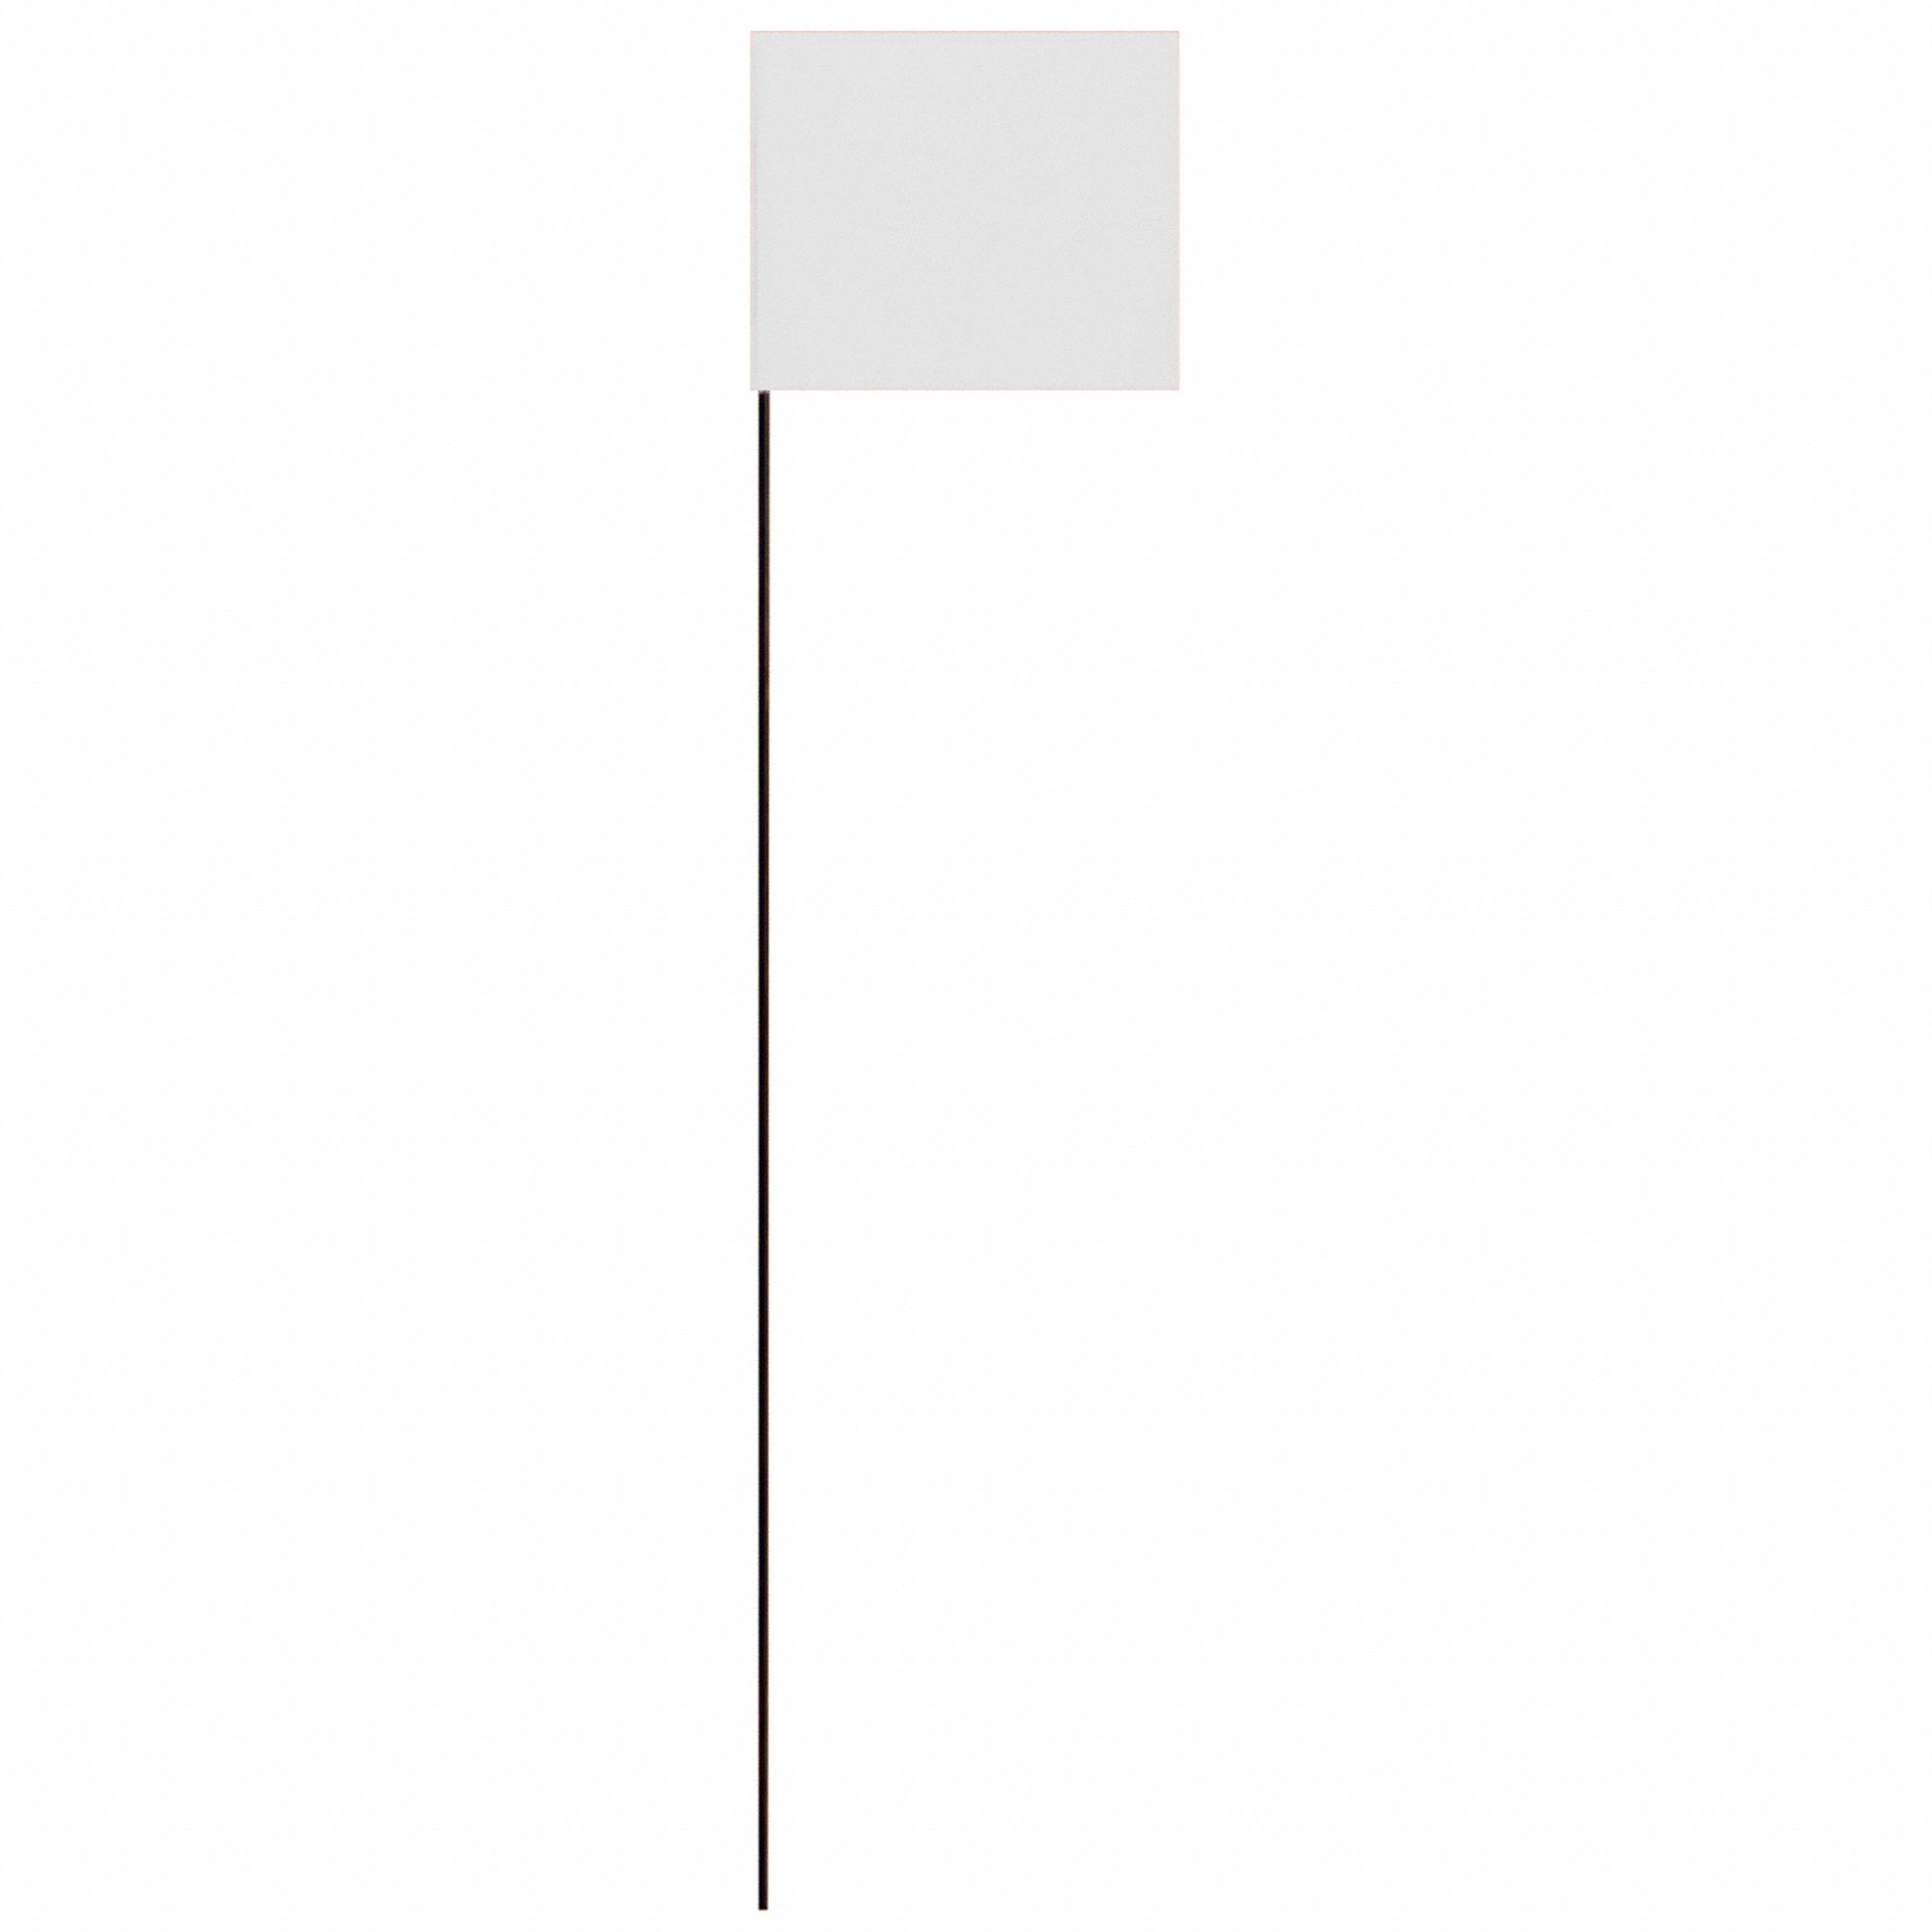 Marking Flag: 21 in x 1 1/2 in Flag Size (HxW), 21 in Staff Ht, White, Blank, No Image, Solid, 25 PK